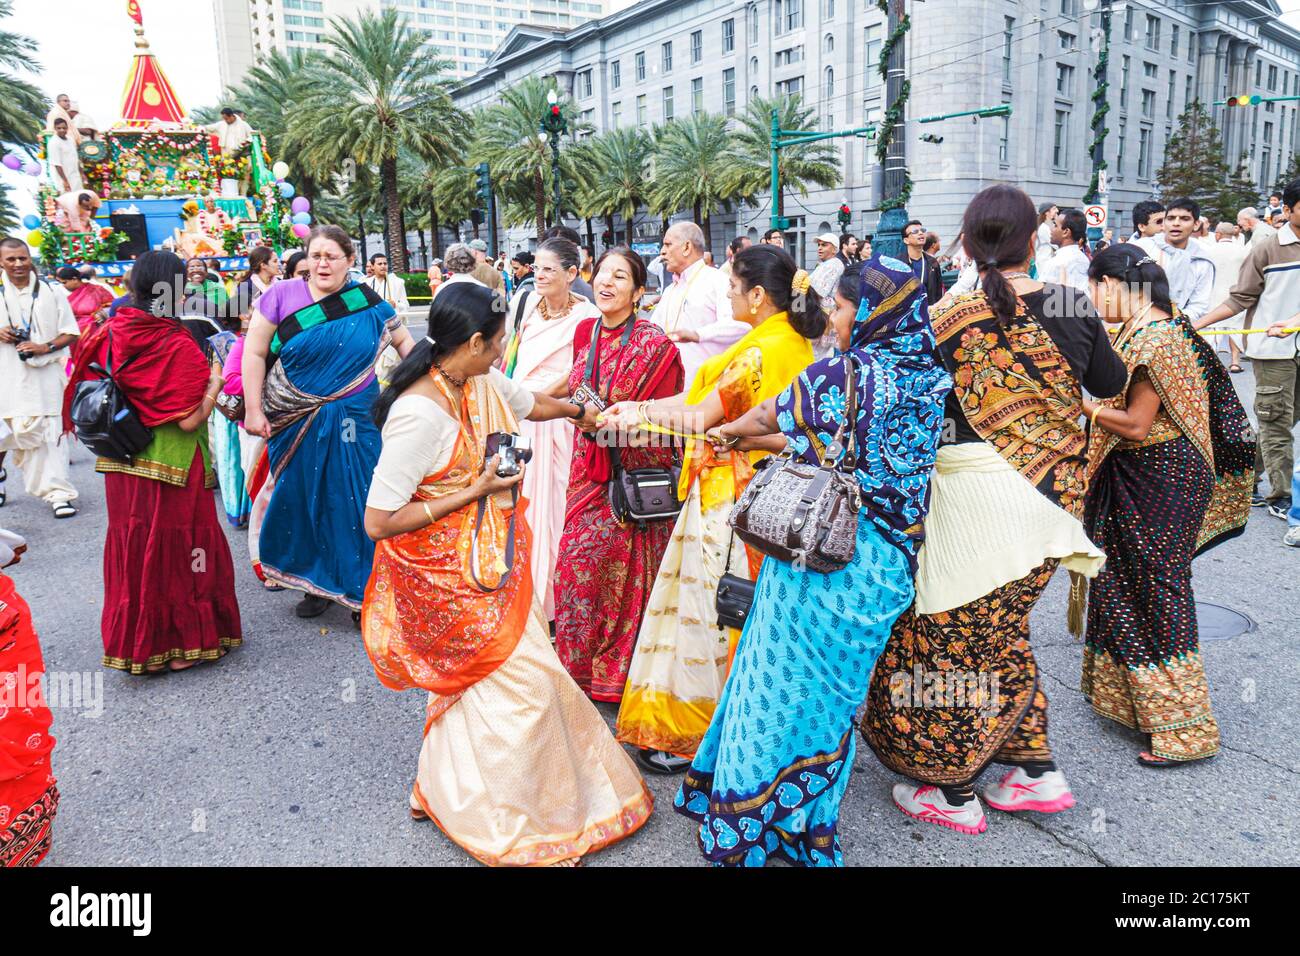 New Orleans Louisiana,downtown,Canal Street,Festival of India,Rath Yatra,Hare Krishna,Hinduism,Eastern religion,festival,parade,procession,Asian woman Stock Photo